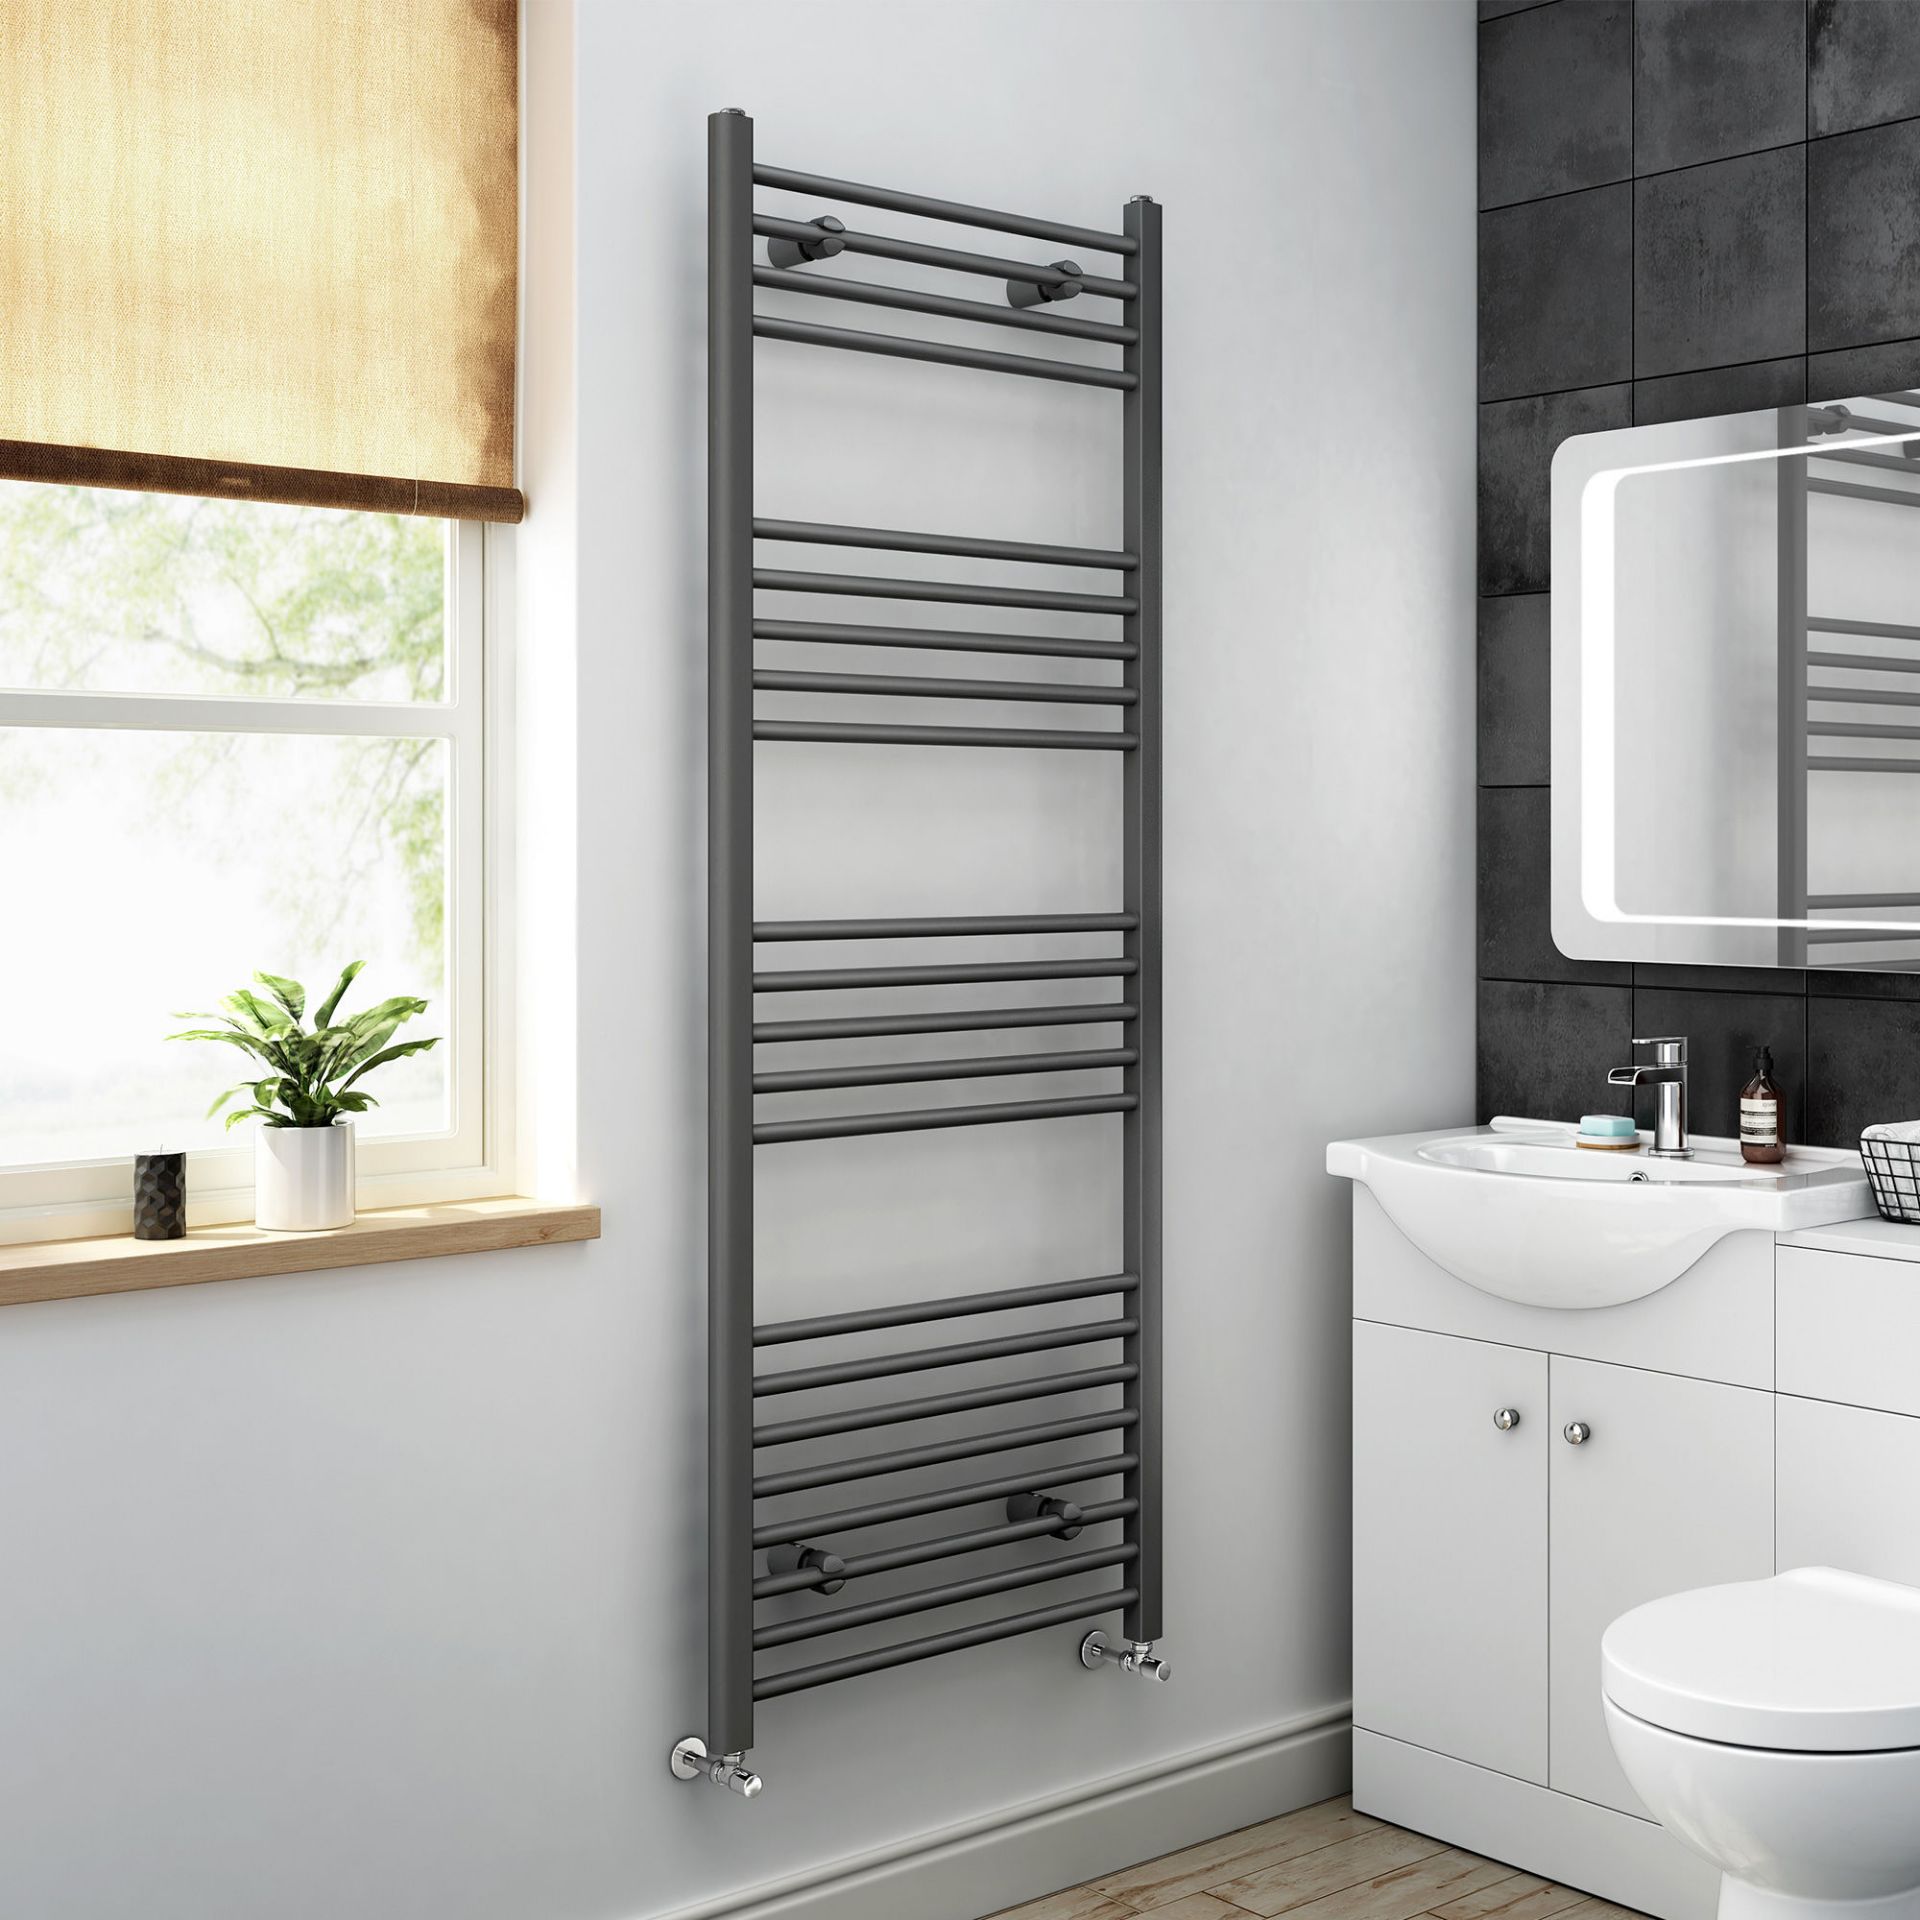 (PM54) 1600x600mm - 20mm Tubes - Anthracite Heated Straight Rail Ladder Towel Radiator. RRP £1... - Image 3 of 3